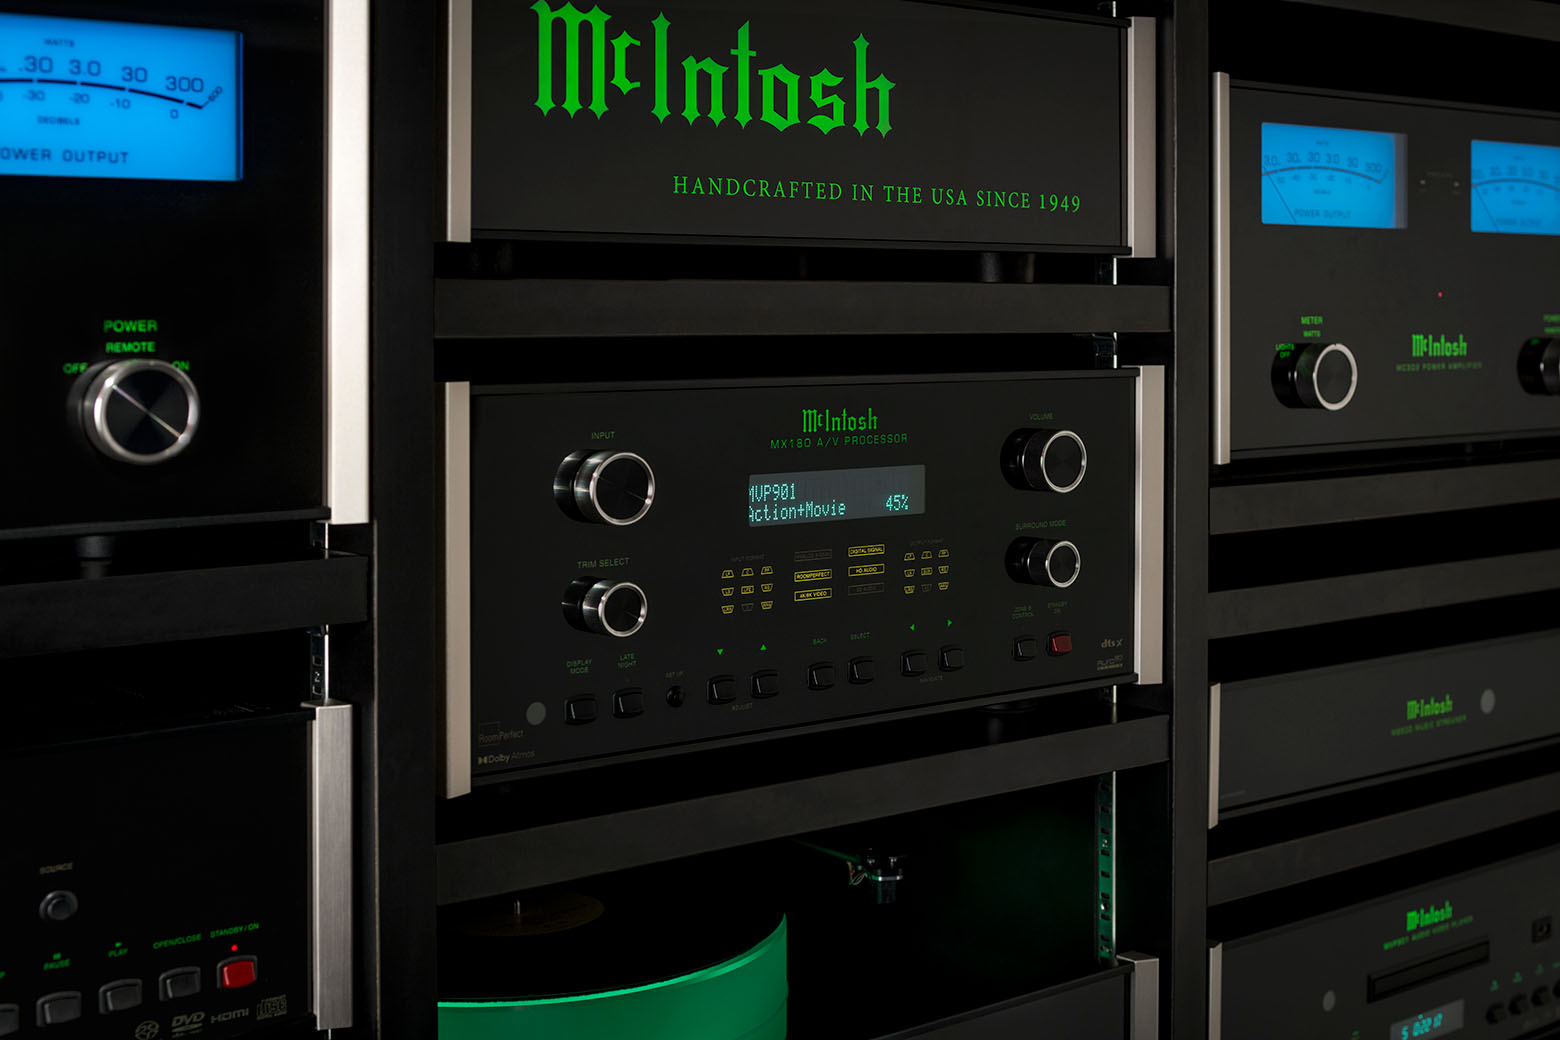 McIntosh MX180 A/V Processor in home theater system